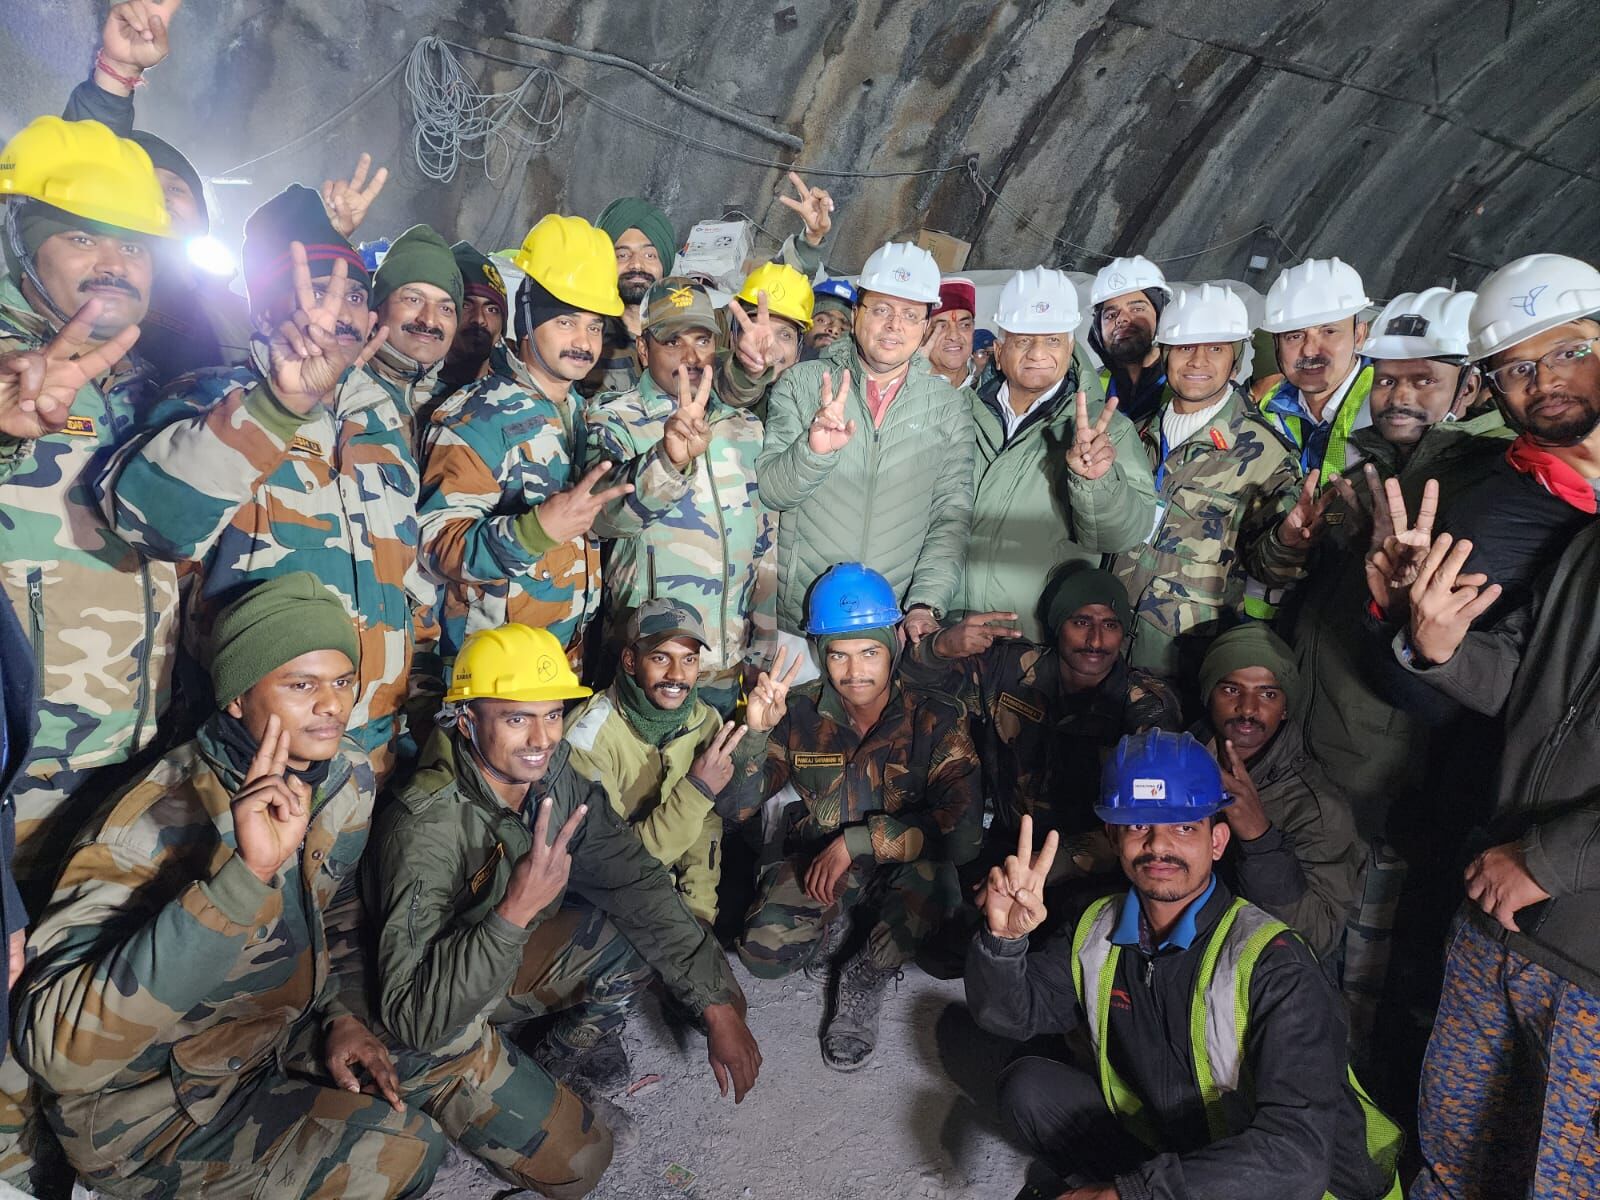 Uttarakhand Tunnel Rescue: Madras Sappers Led From the Front in The Rescue Ops